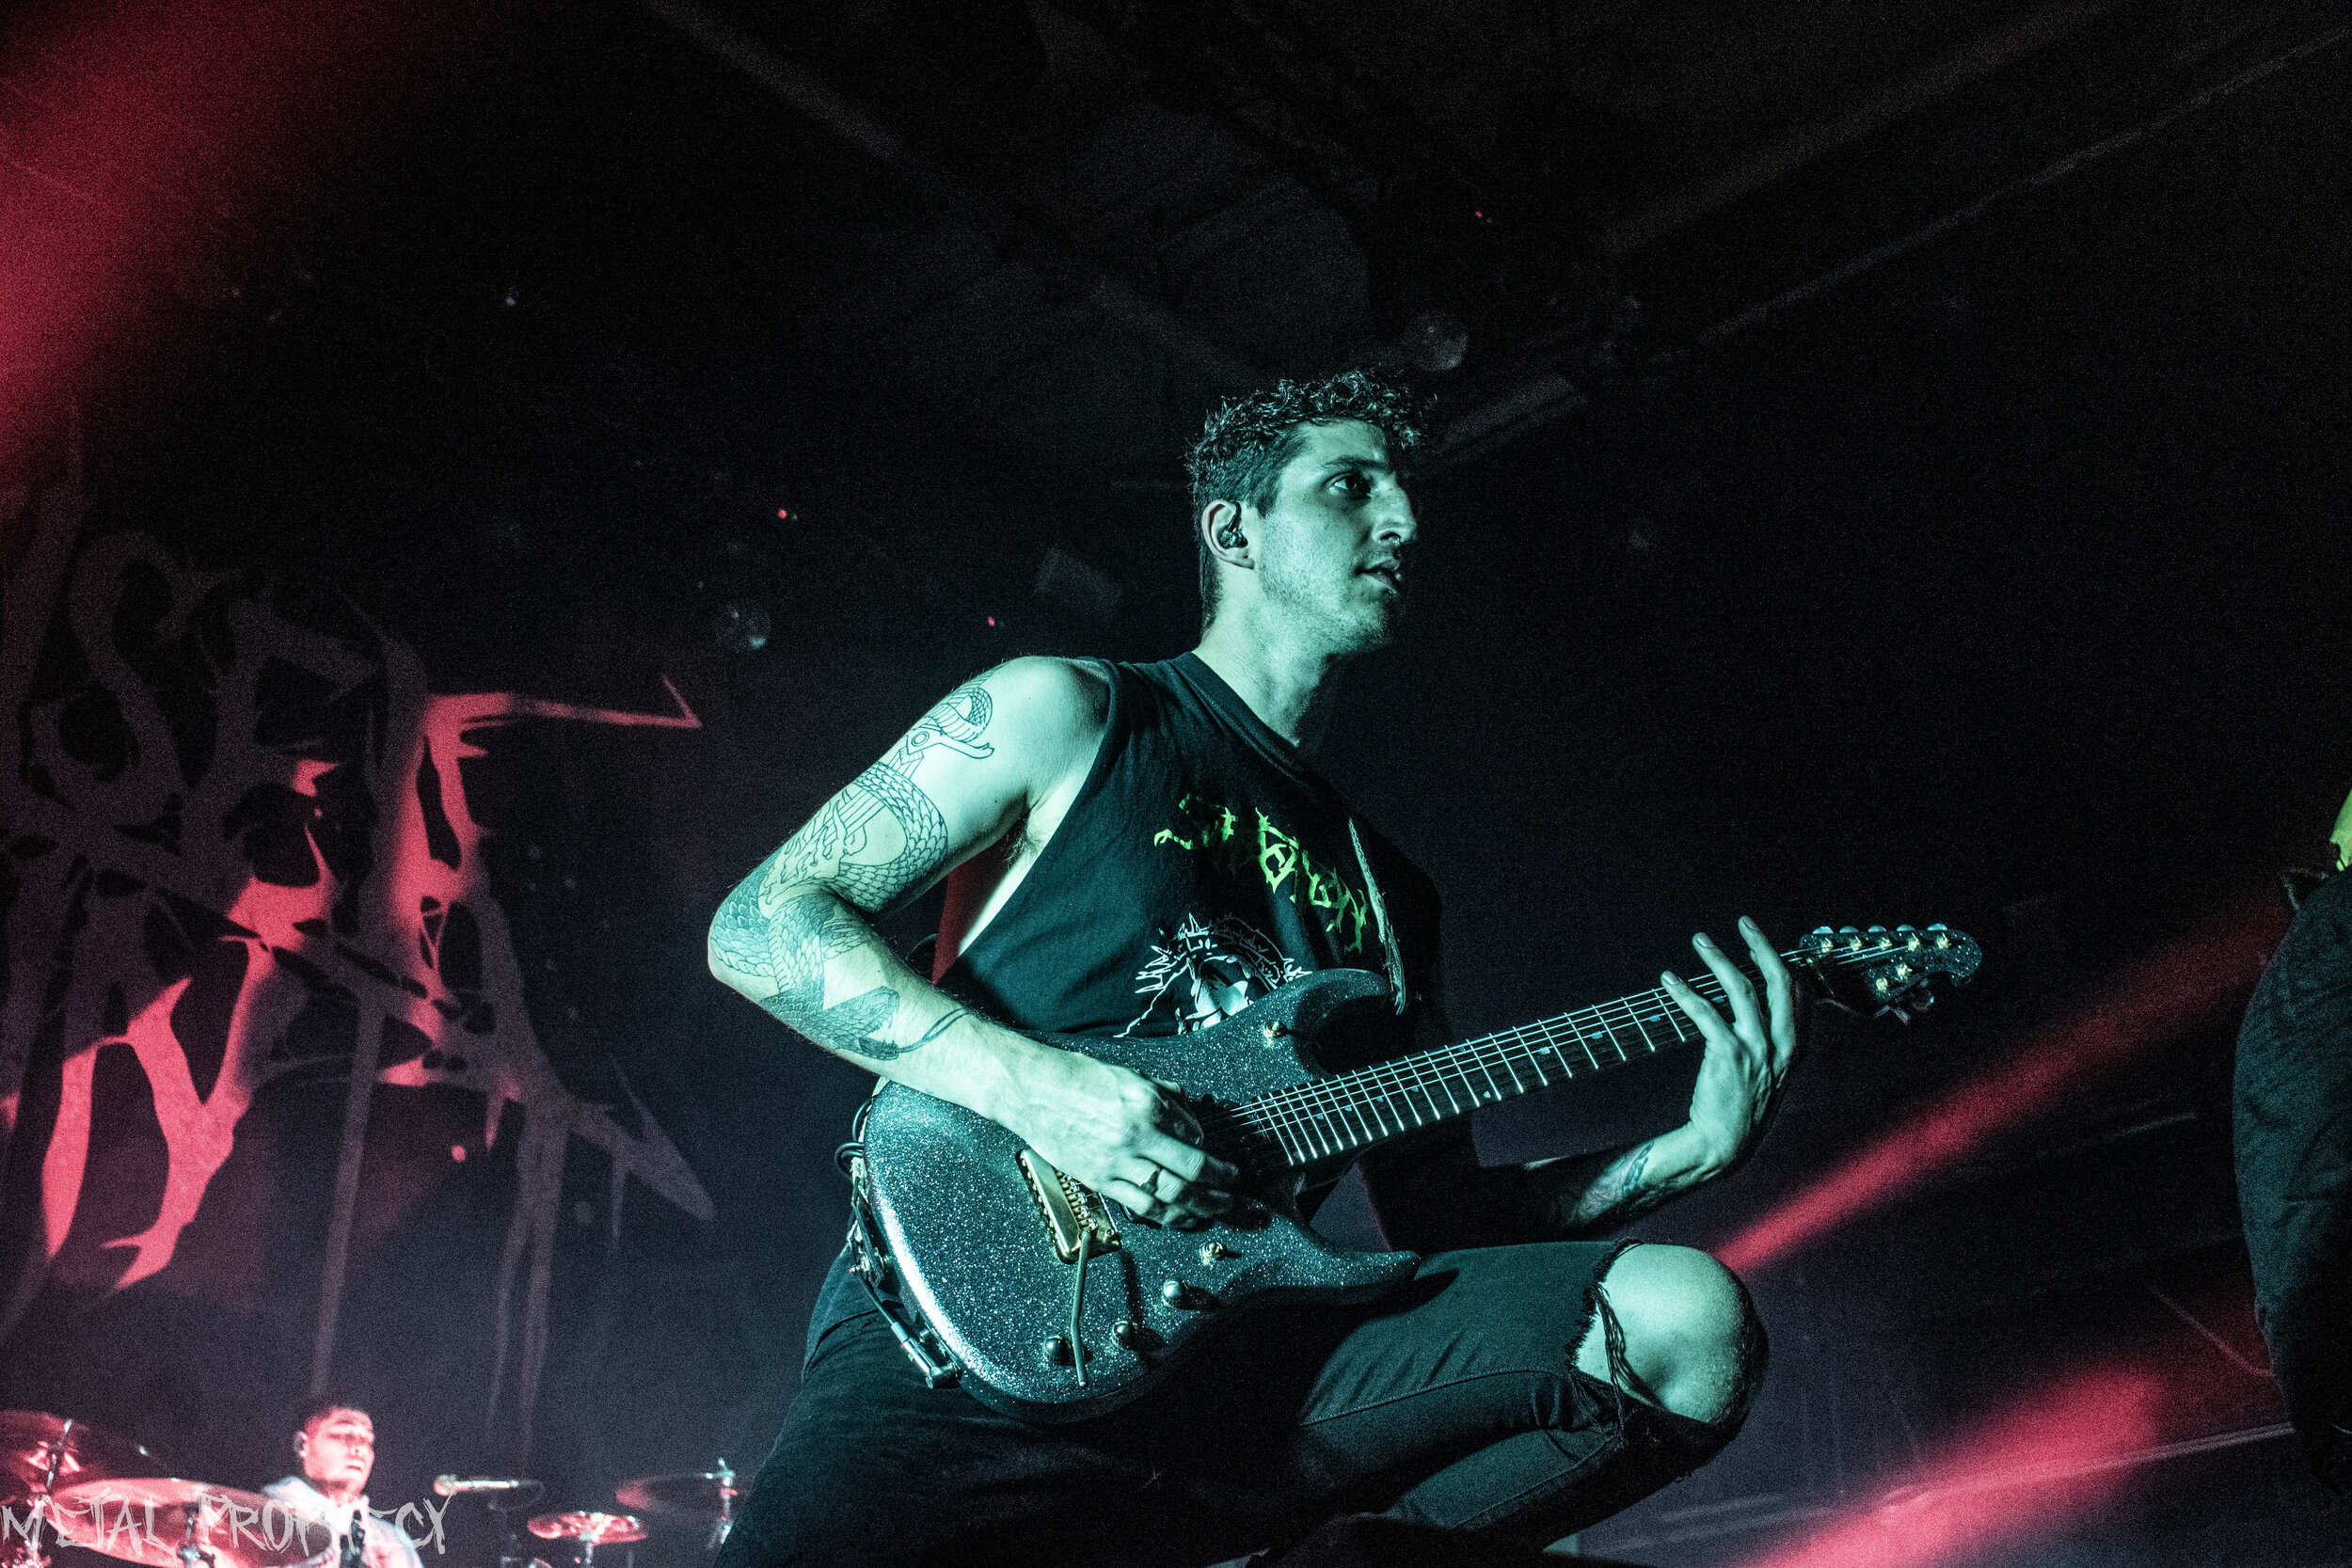 Chelsea Grin at The Masquerade